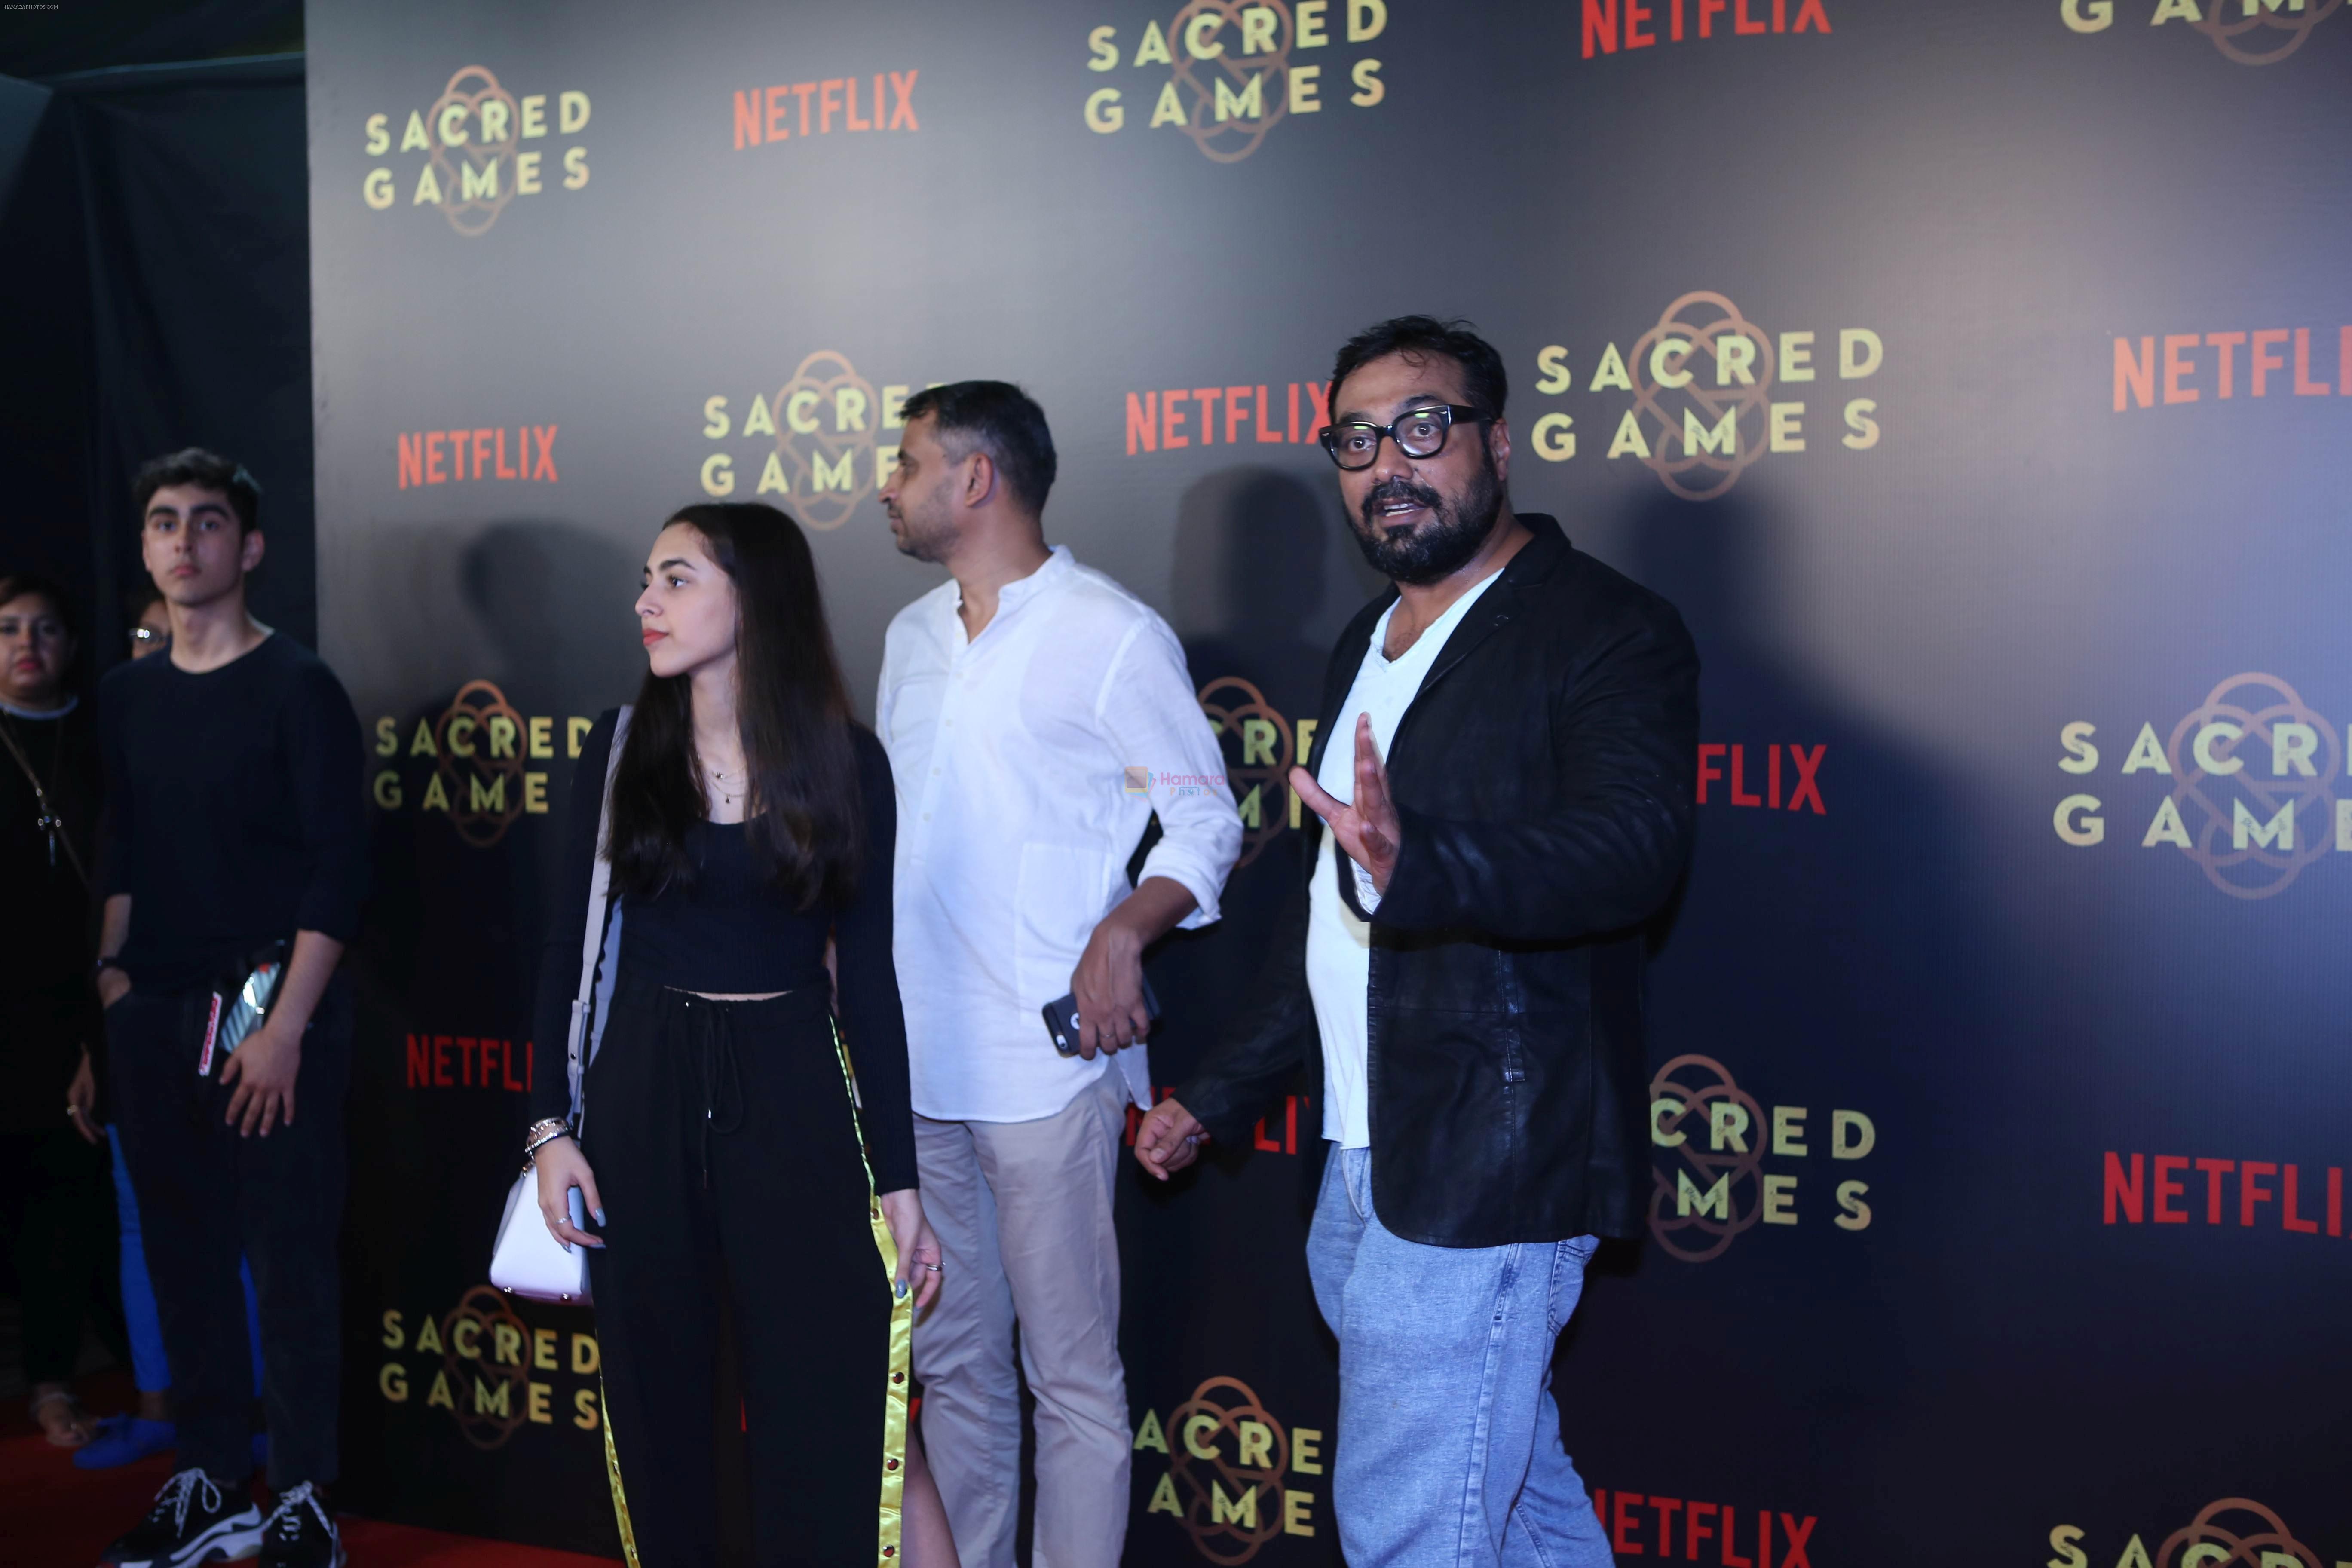 Anurag Kashyap at the Screening of Netflix Sacred Games in pvr icon Andheri on 28th June 2018